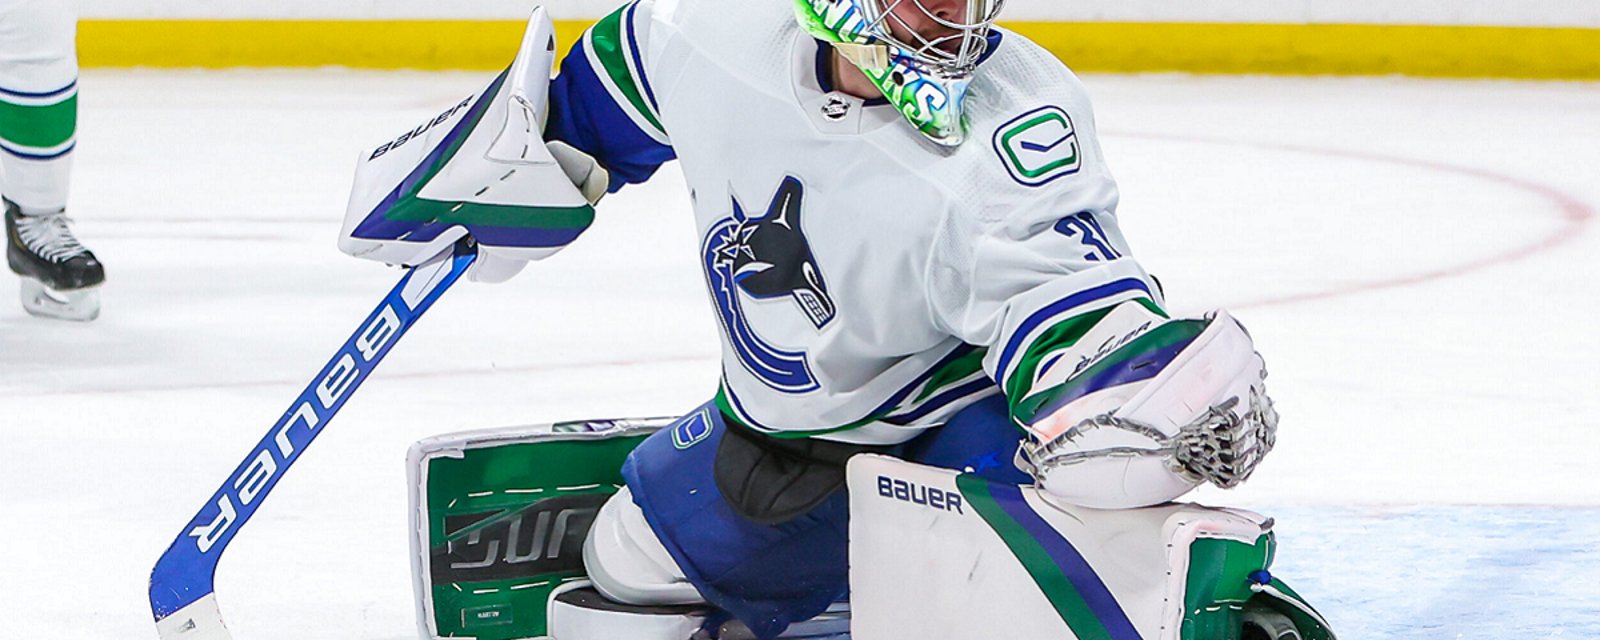 Things go from bad to worse for Spencer Martin in Vancouver.